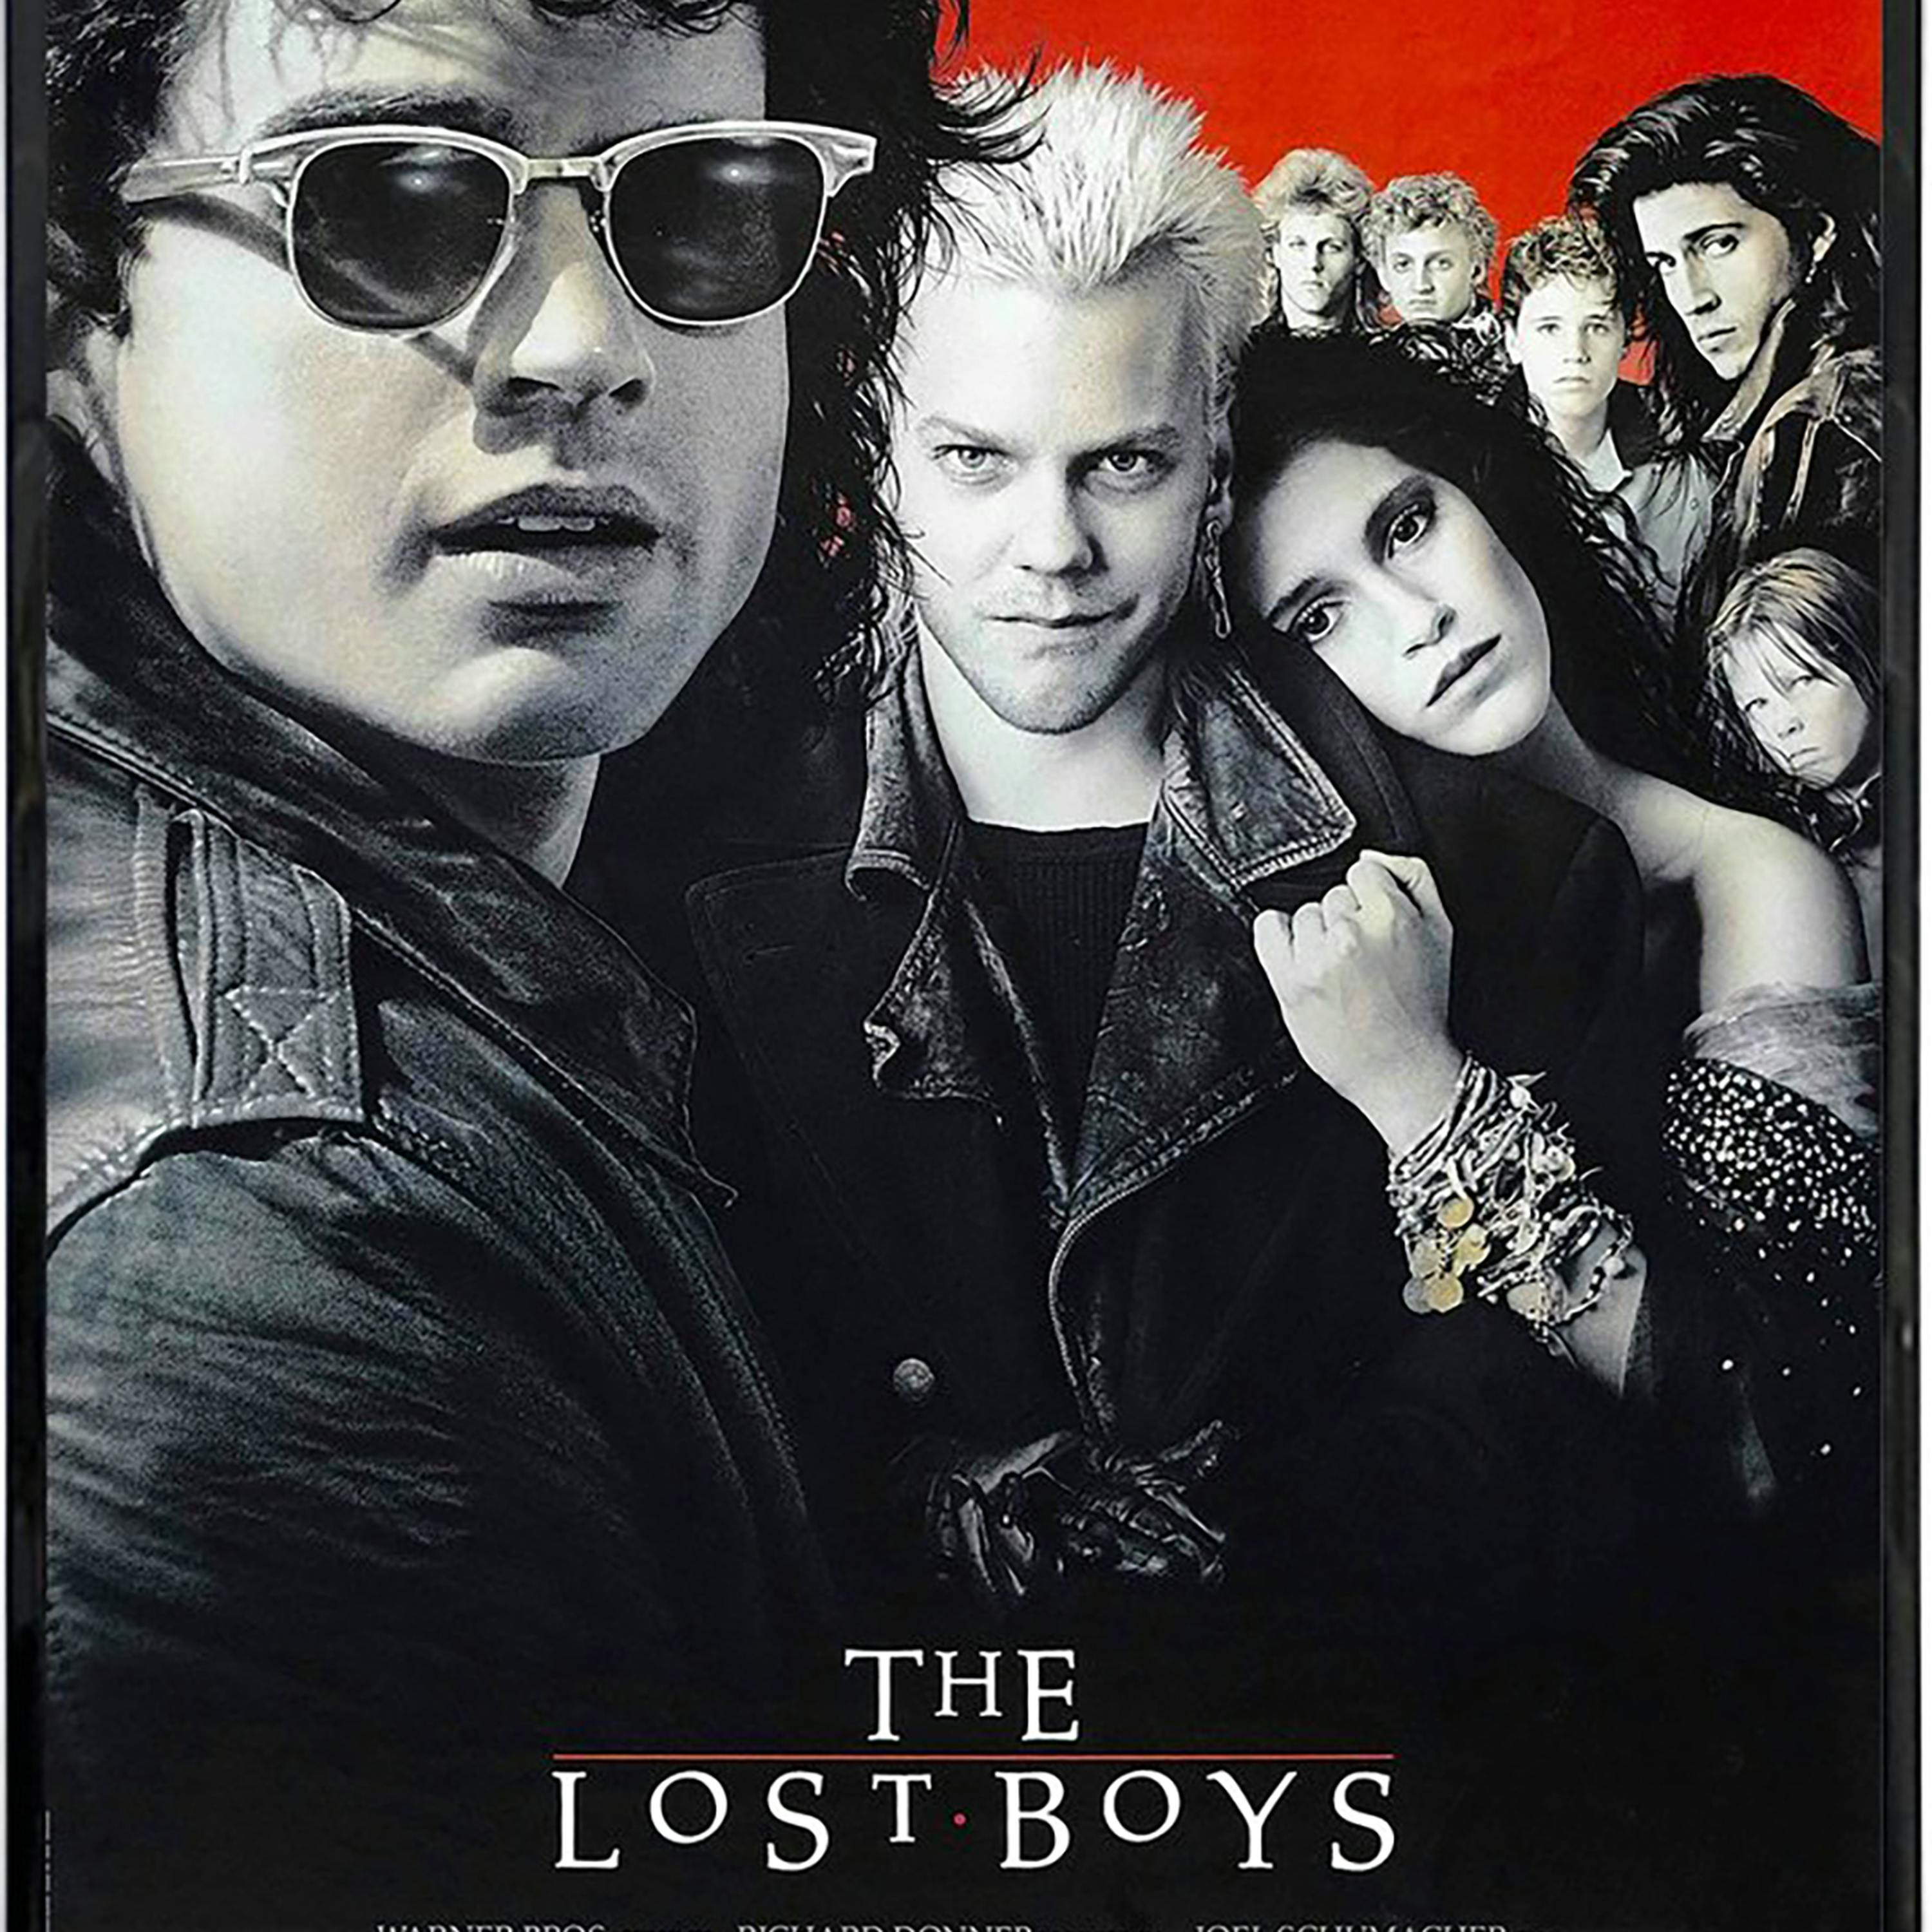 Episode 176 - The Lost Boys (1987)